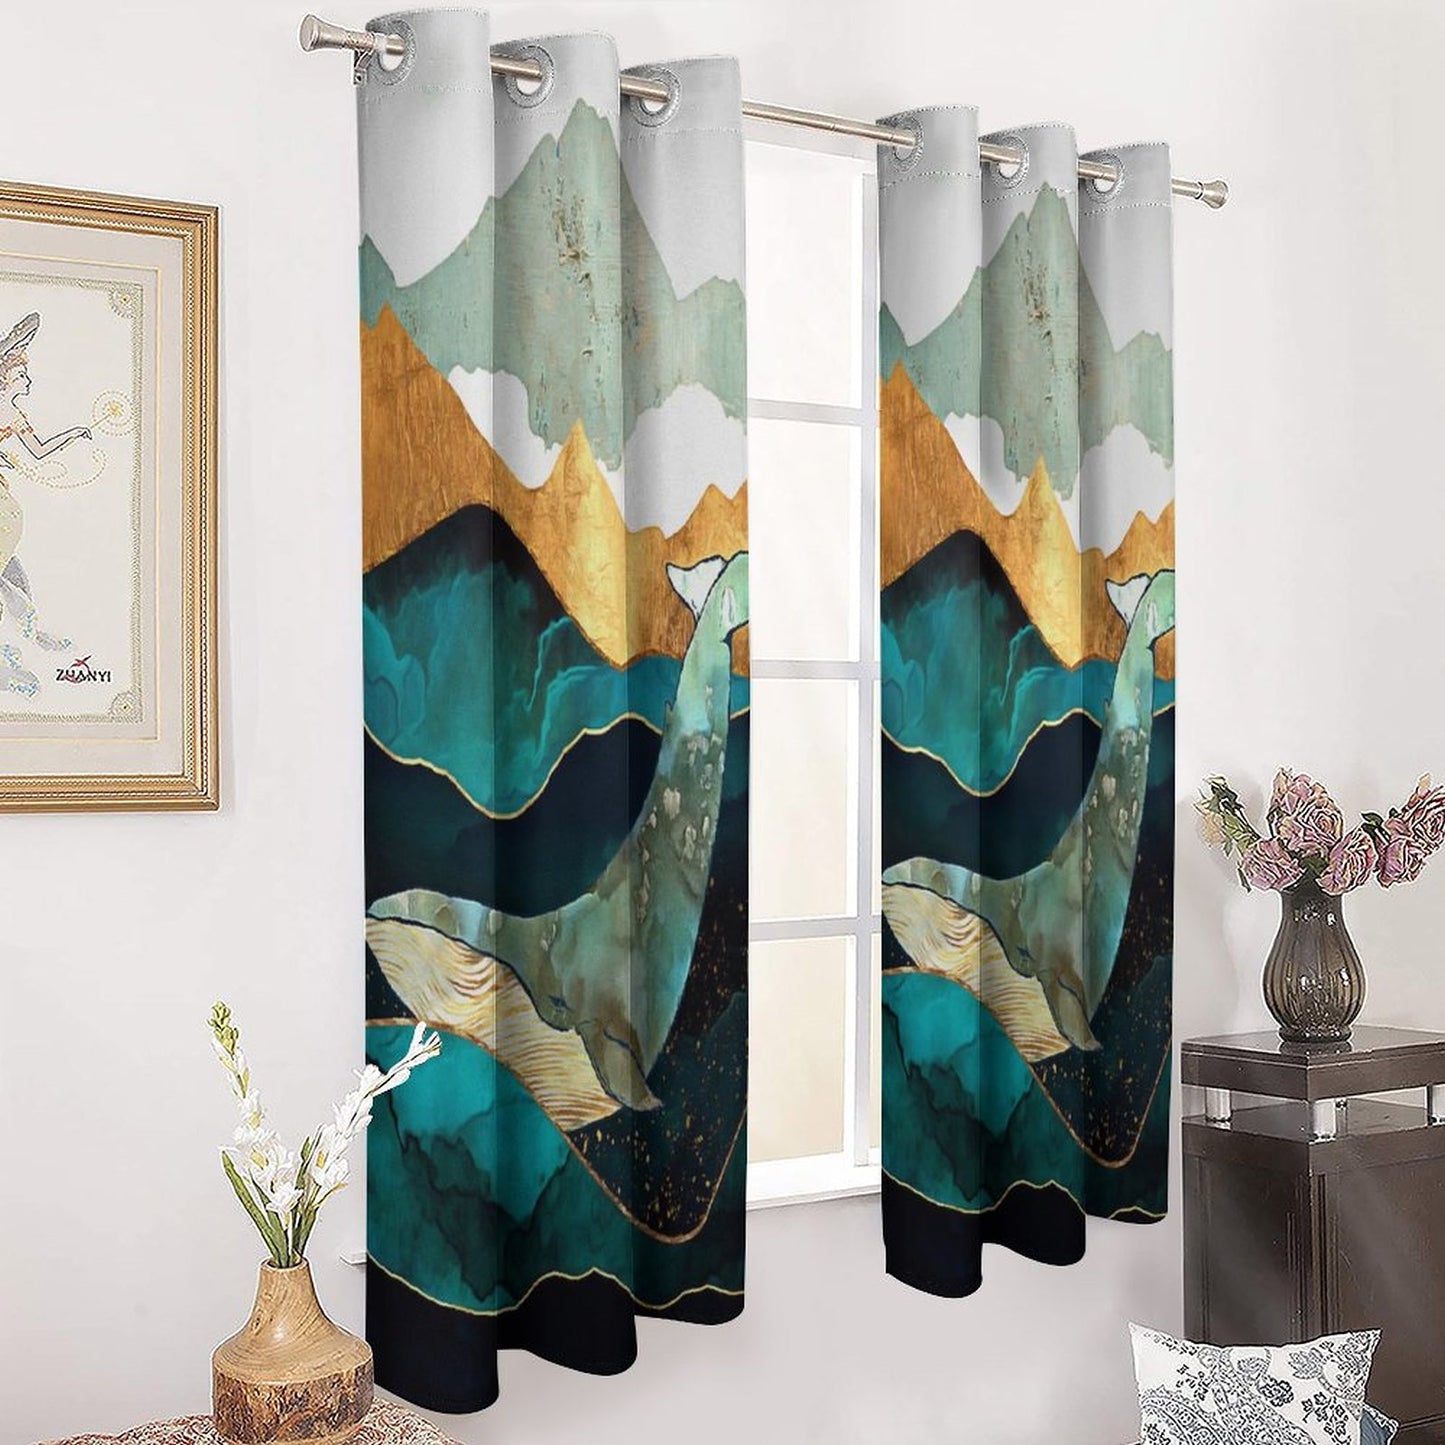 Online DIY Perforated Curtain Sea Whale-Illustration Design-natural Scenery